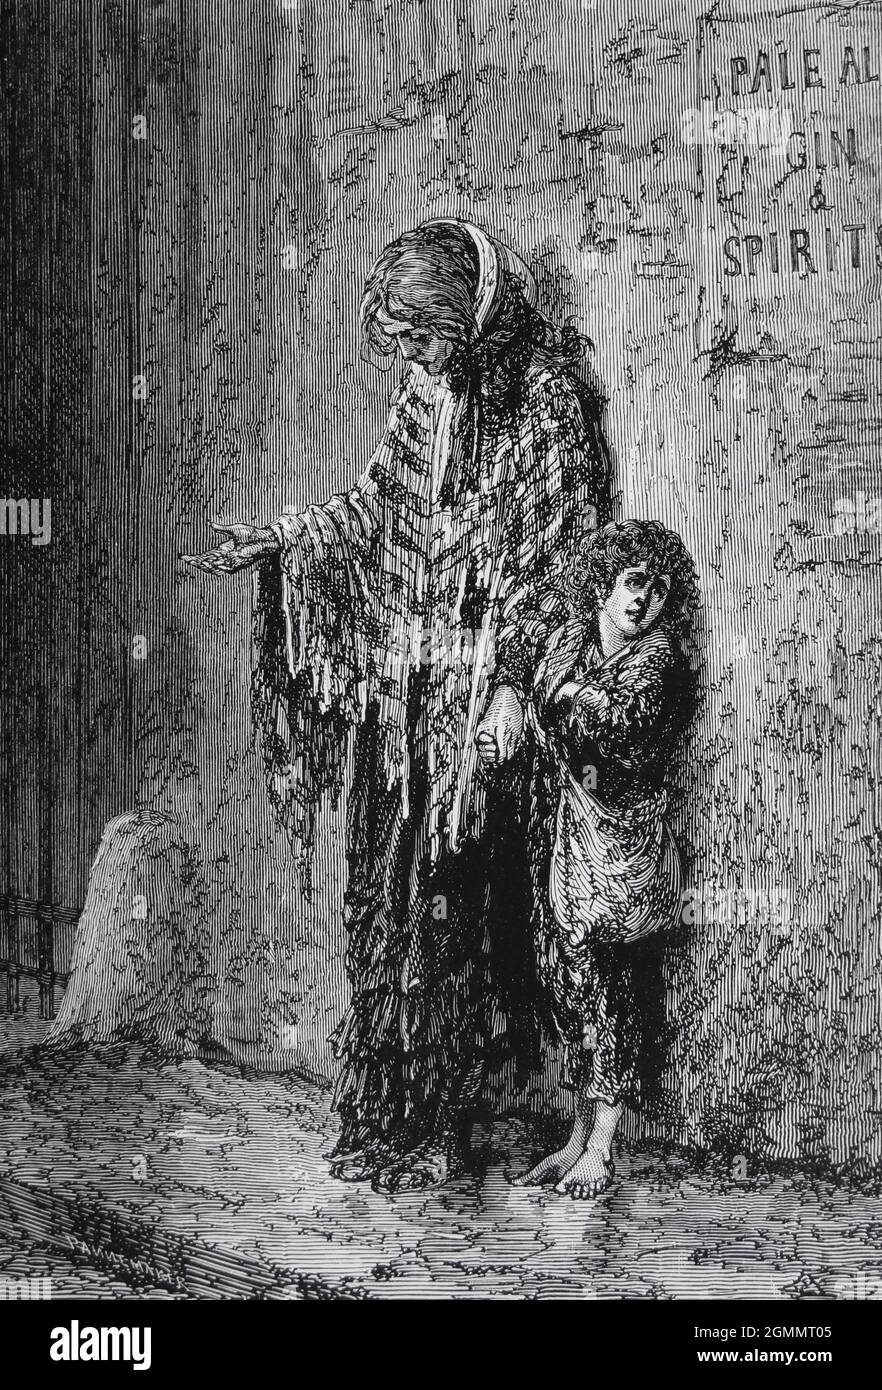 A Poor Mendicant. from the book ' Around the world in eighty days ' by Jules Verne (1828-1905) Translated by Geo. M. Towle, Published in Boston by James. R. Osgood & Co. 1873 First US Edition Stock Photo